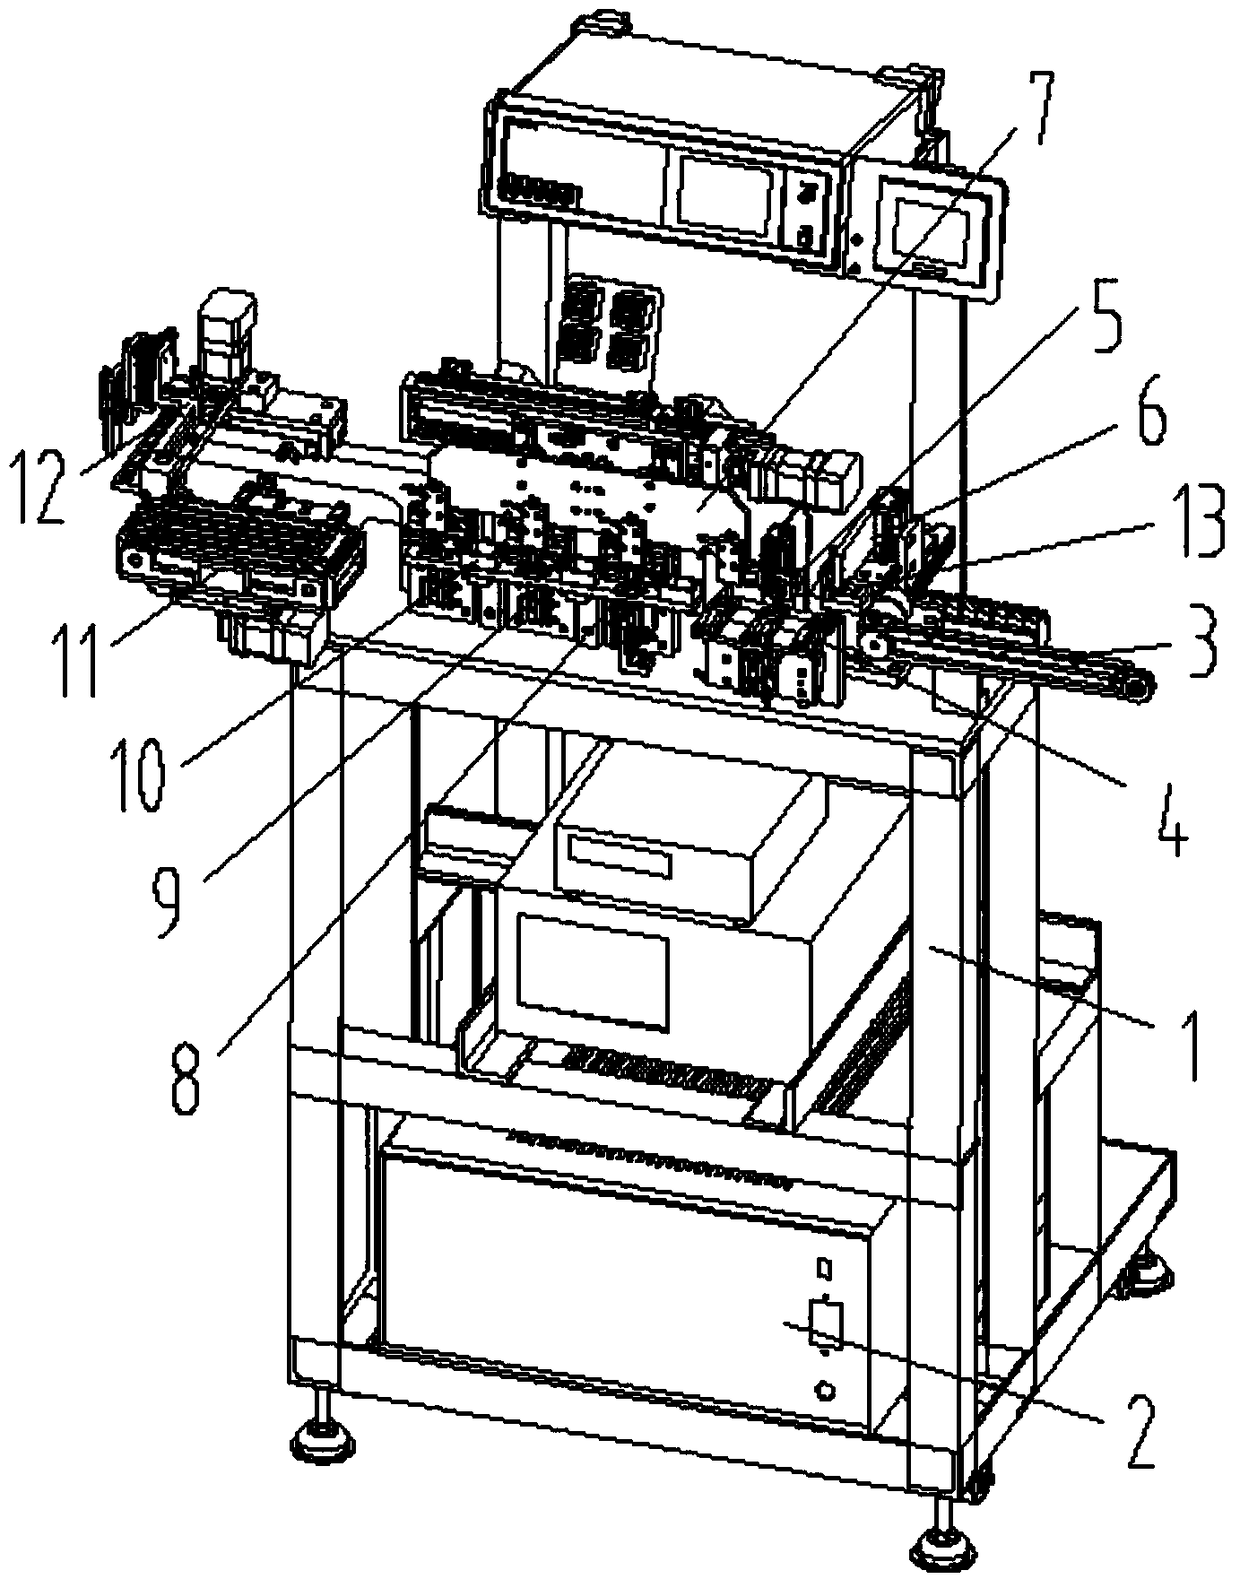 A chip resistor detection and sorting machine